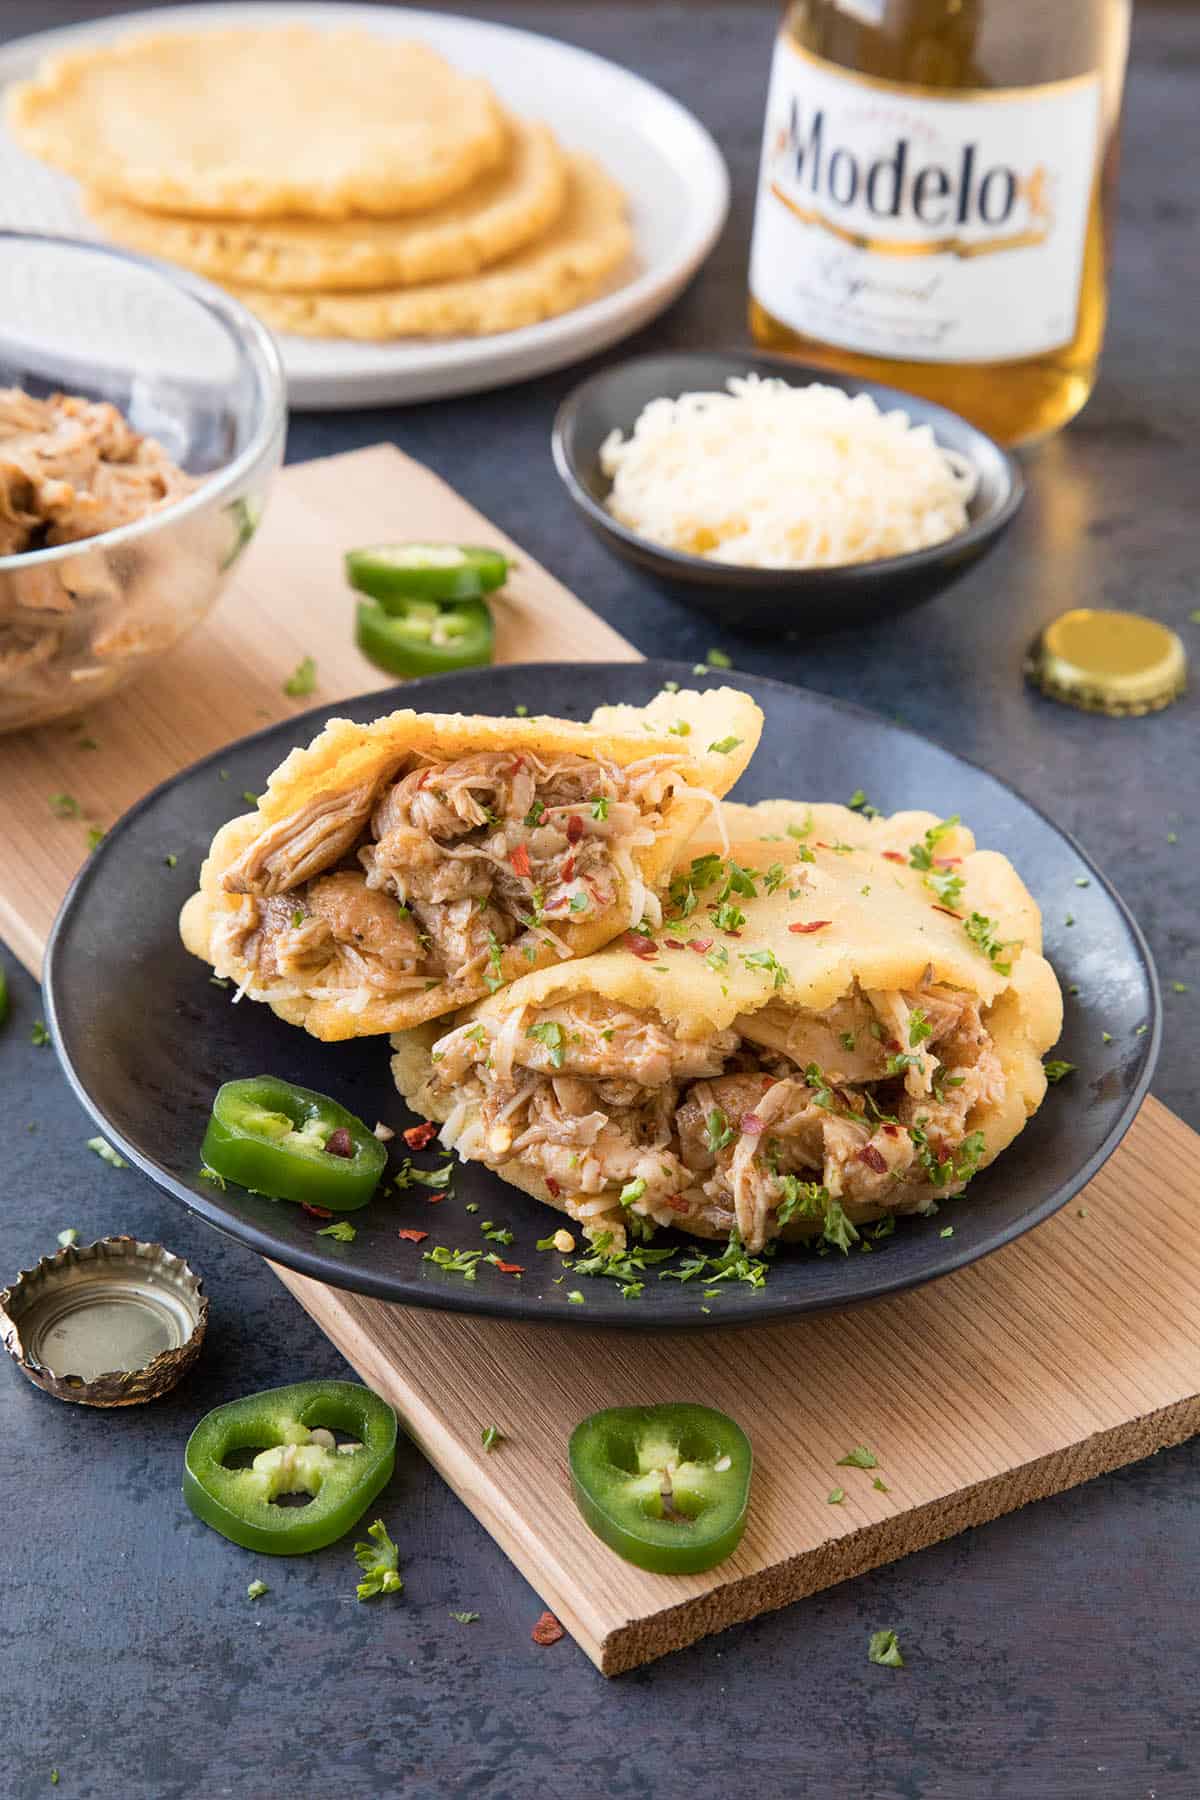 Pulled Chicken Gorditas Recipe - Stuffed with Delicious Pulled Chicken